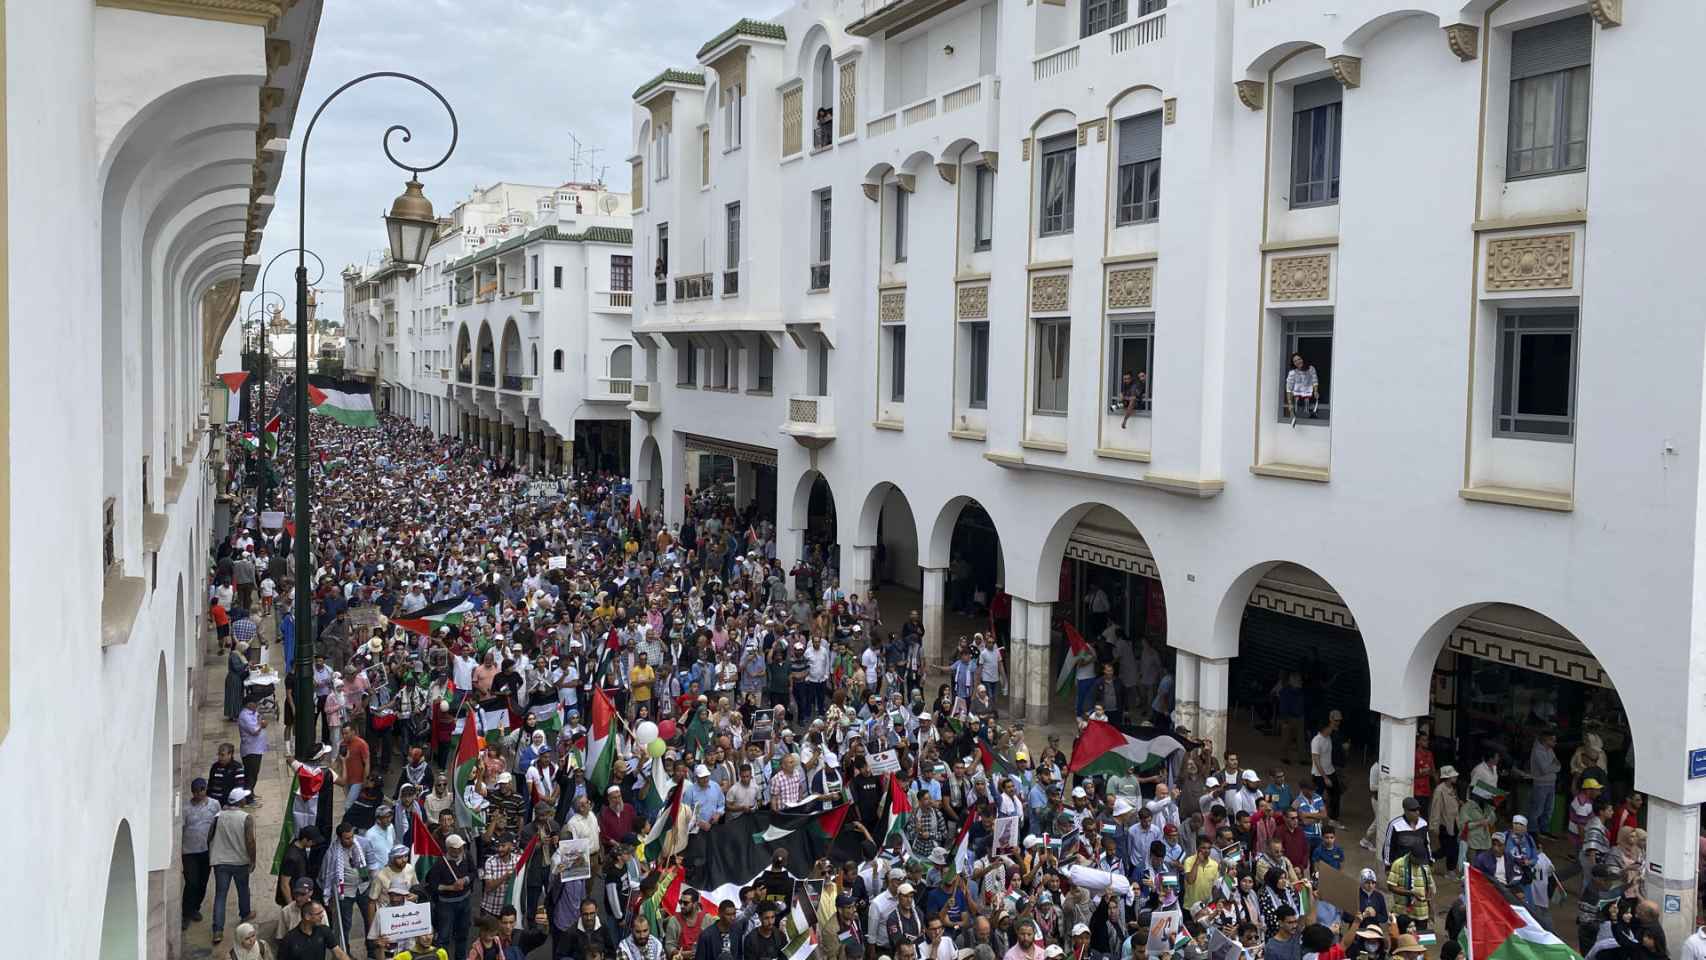 Thousands of people demonstrate in the streets of Rabat.